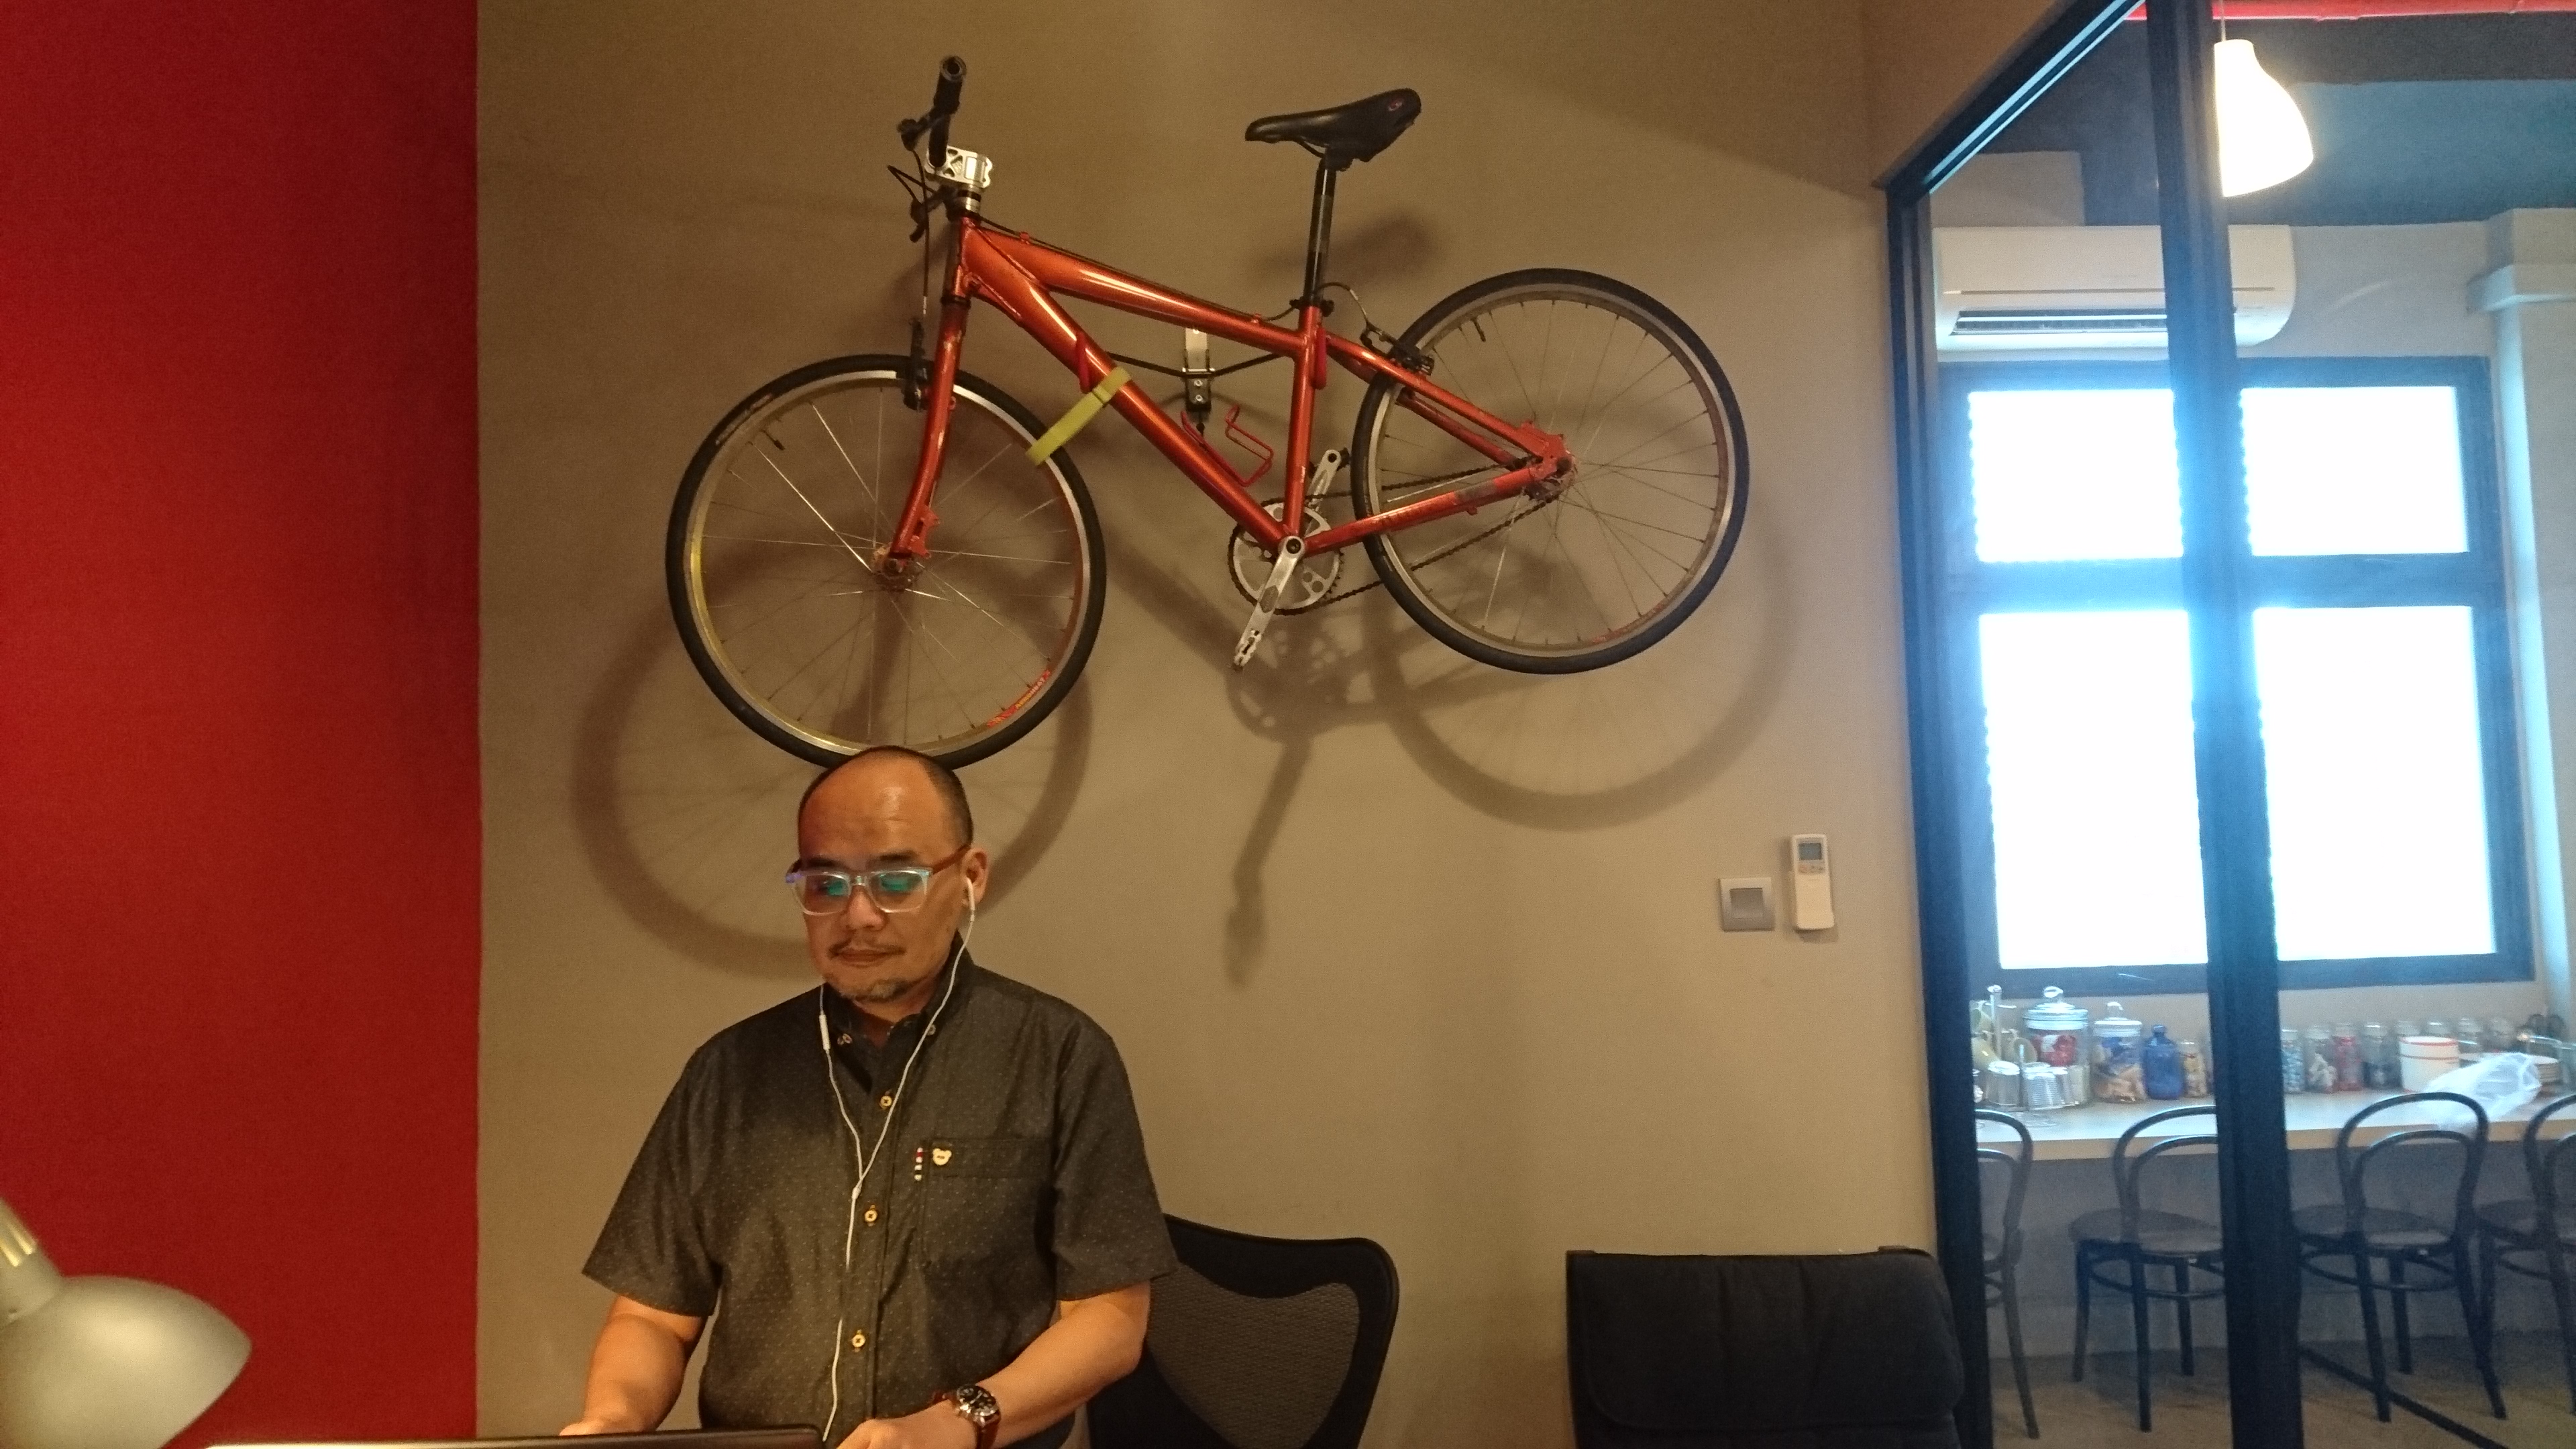 Mark Goh, founder of VanillaLaw LLC, who is also an avid cyclist.